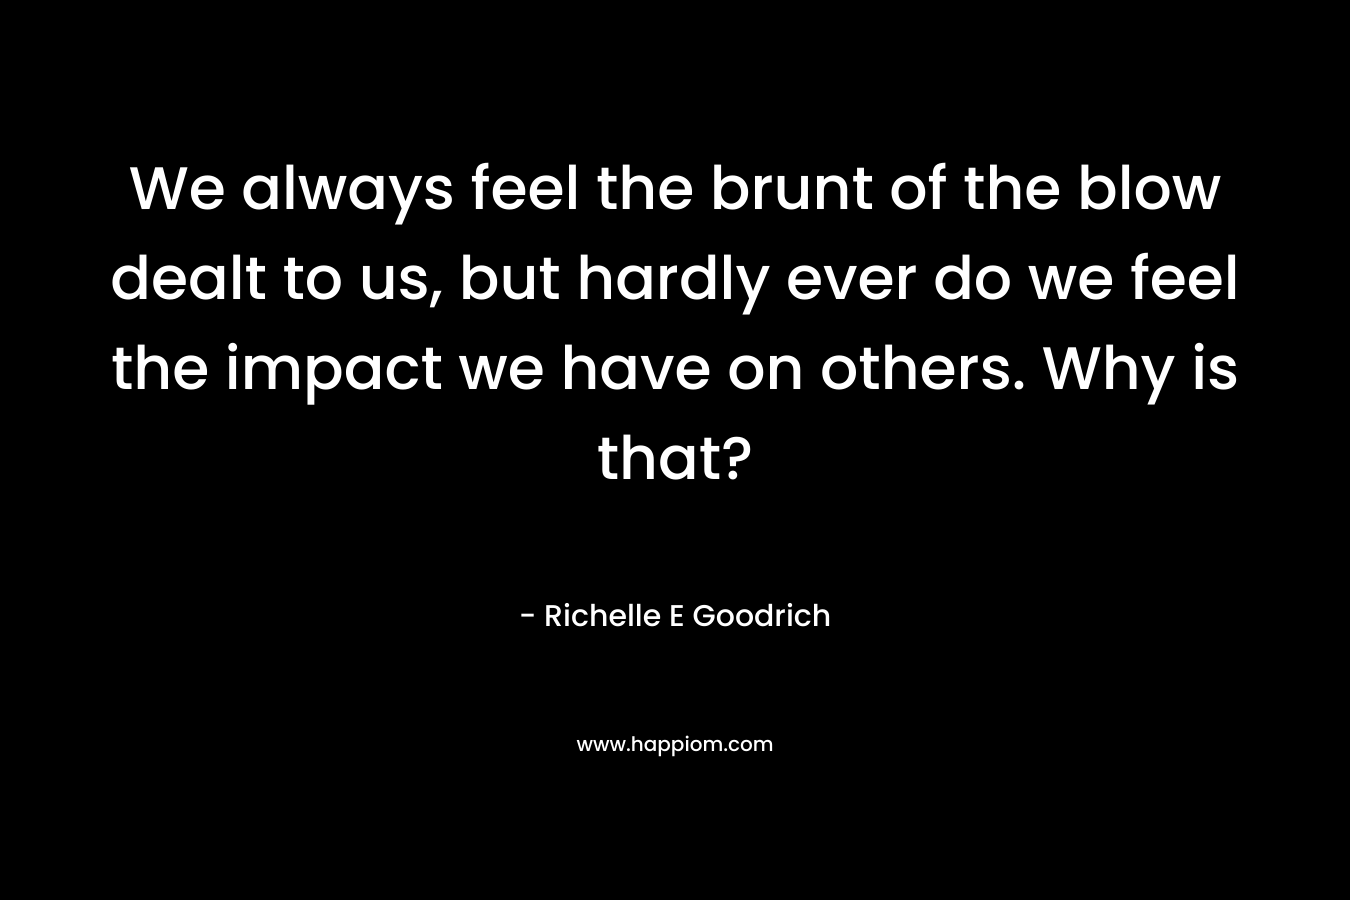 We always feel the brunt of the blow dealt to us, but hardly ever do we feel the impact we have on others. Why is that? – Richelle E Goodrich